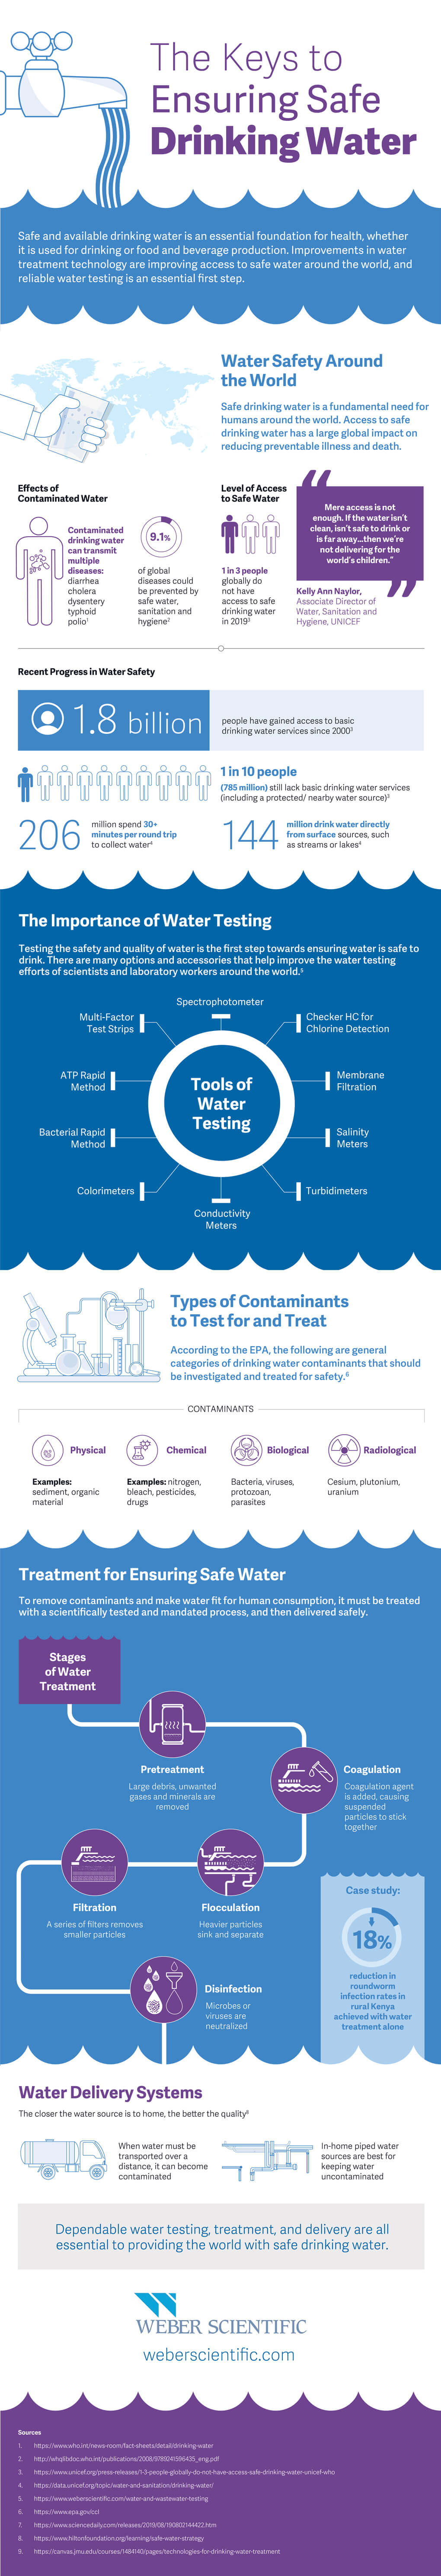 Water and Wastewater Testing Infographic | Weber Scientific